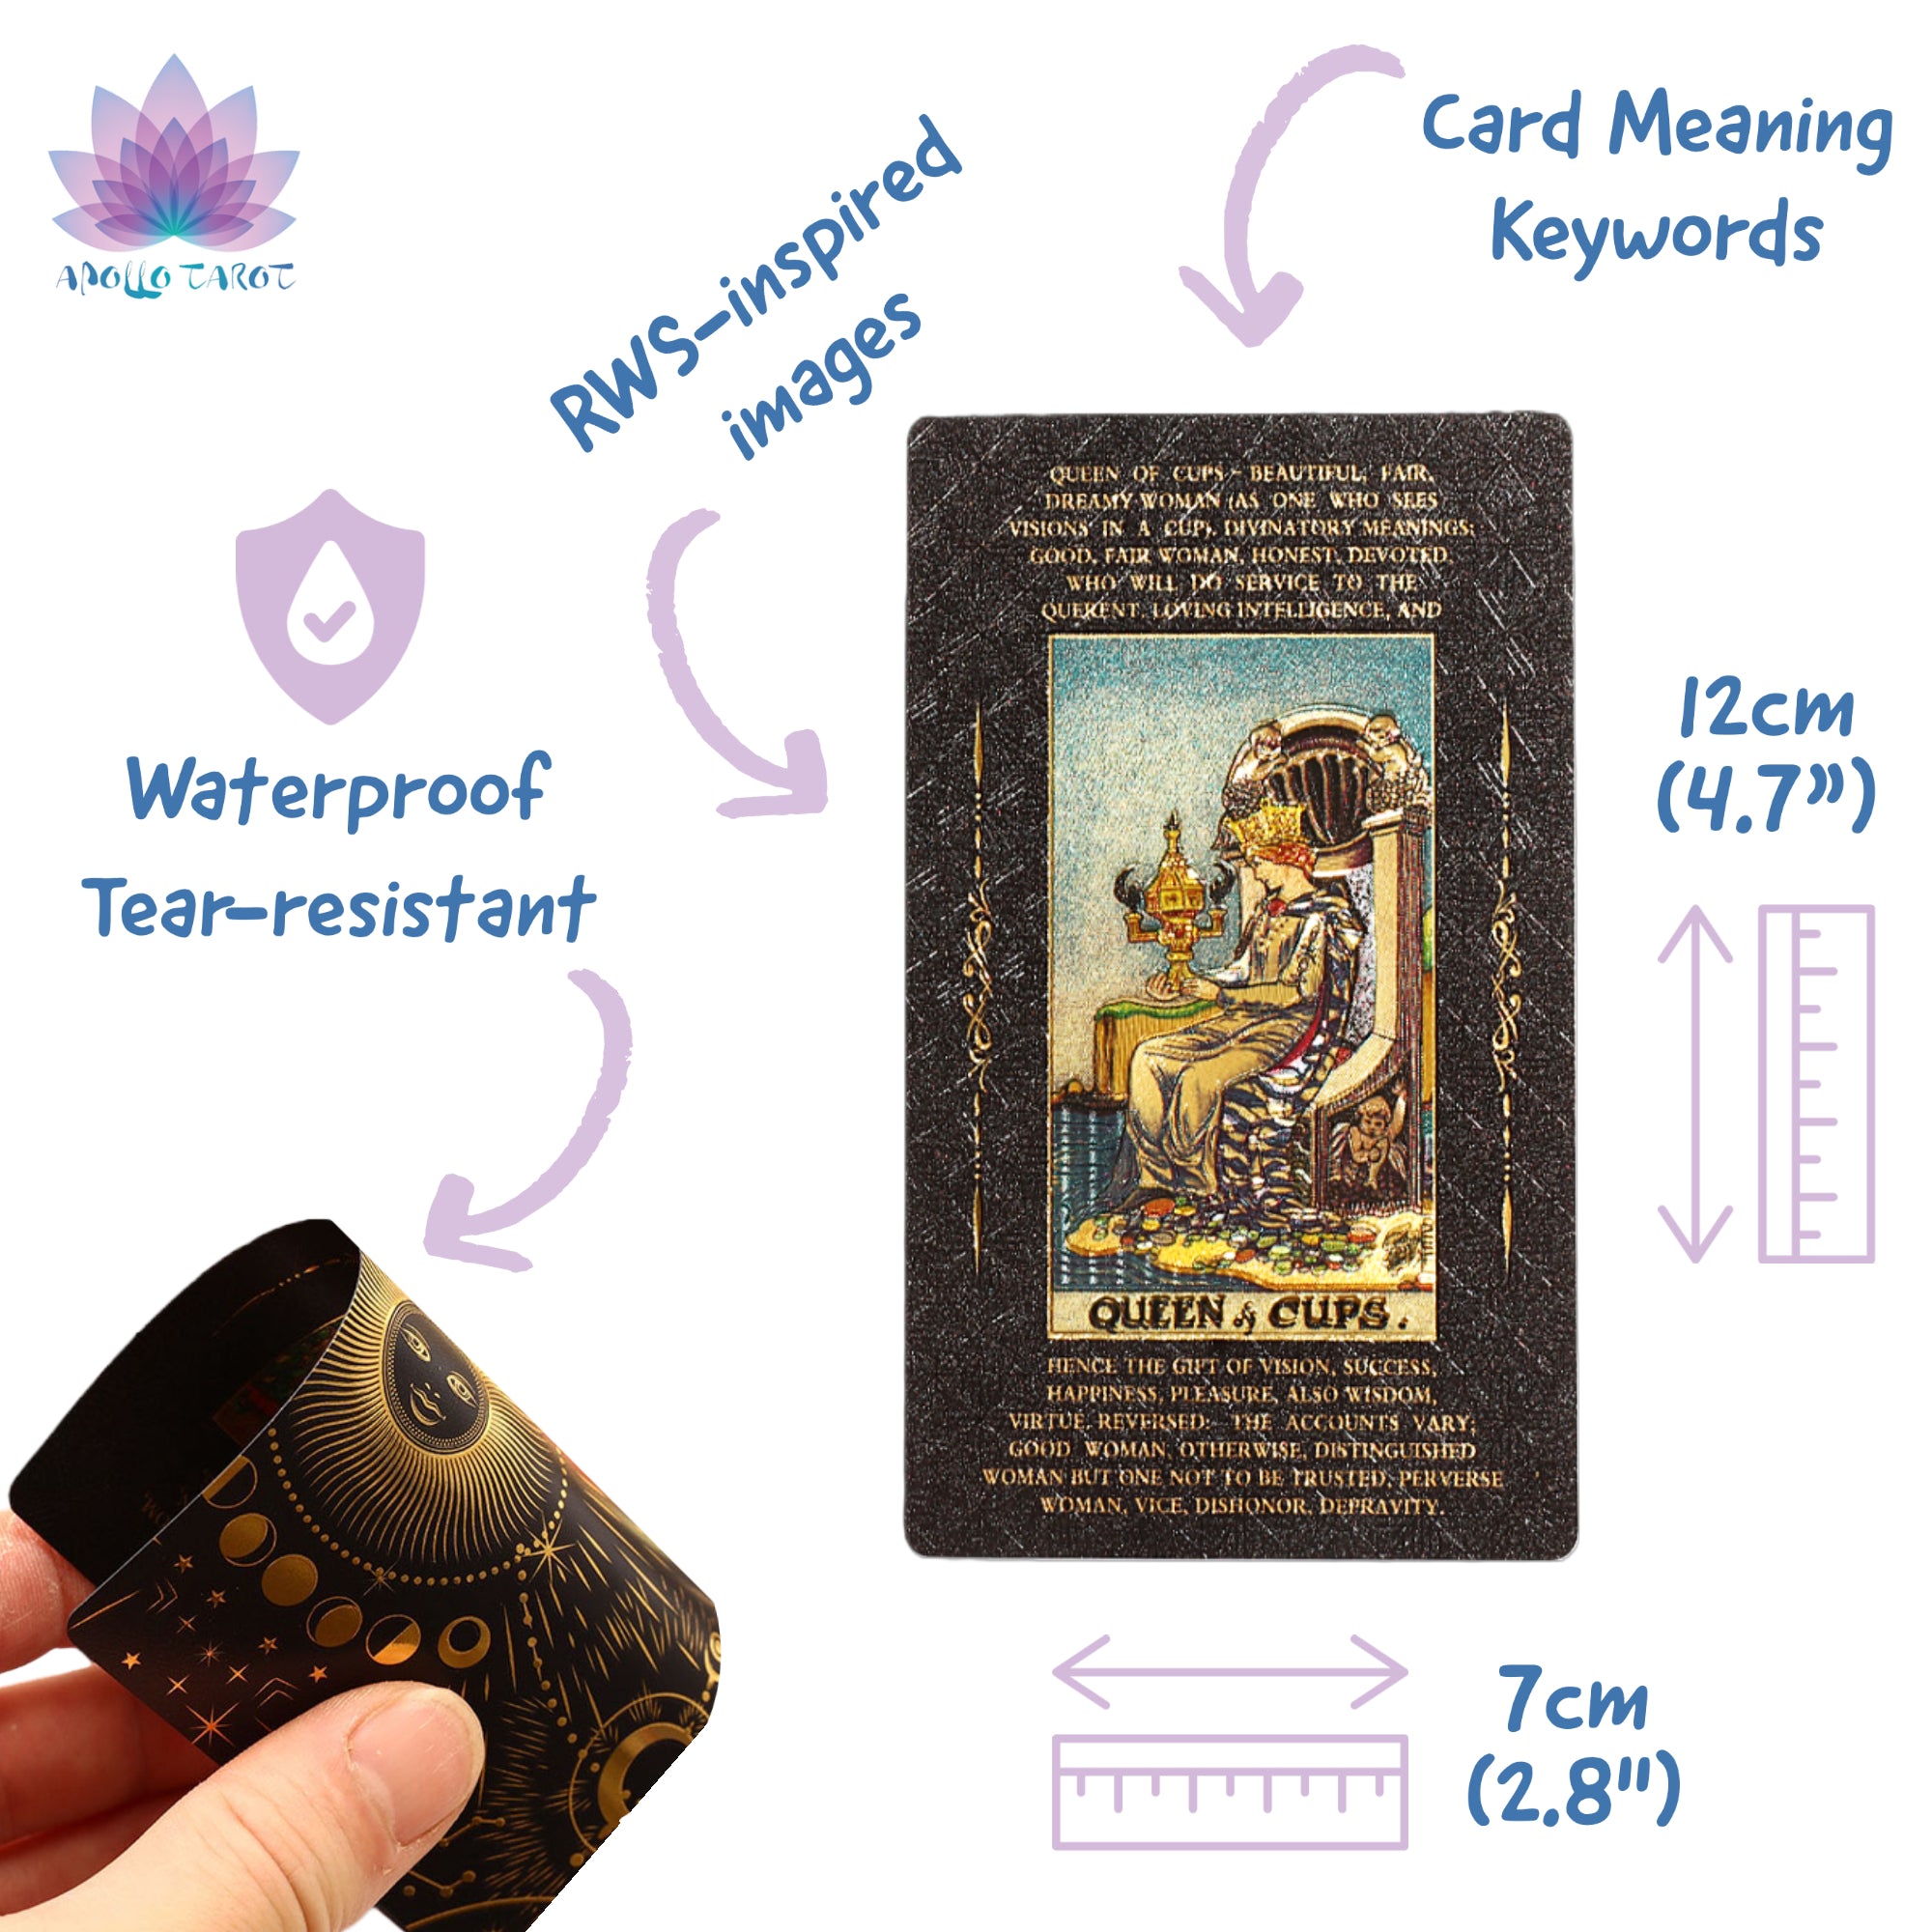 Gold Foil Beginner Tarot Deck With Card Meaning Keywords | MEasures And Features | Apollo Tarot Shop